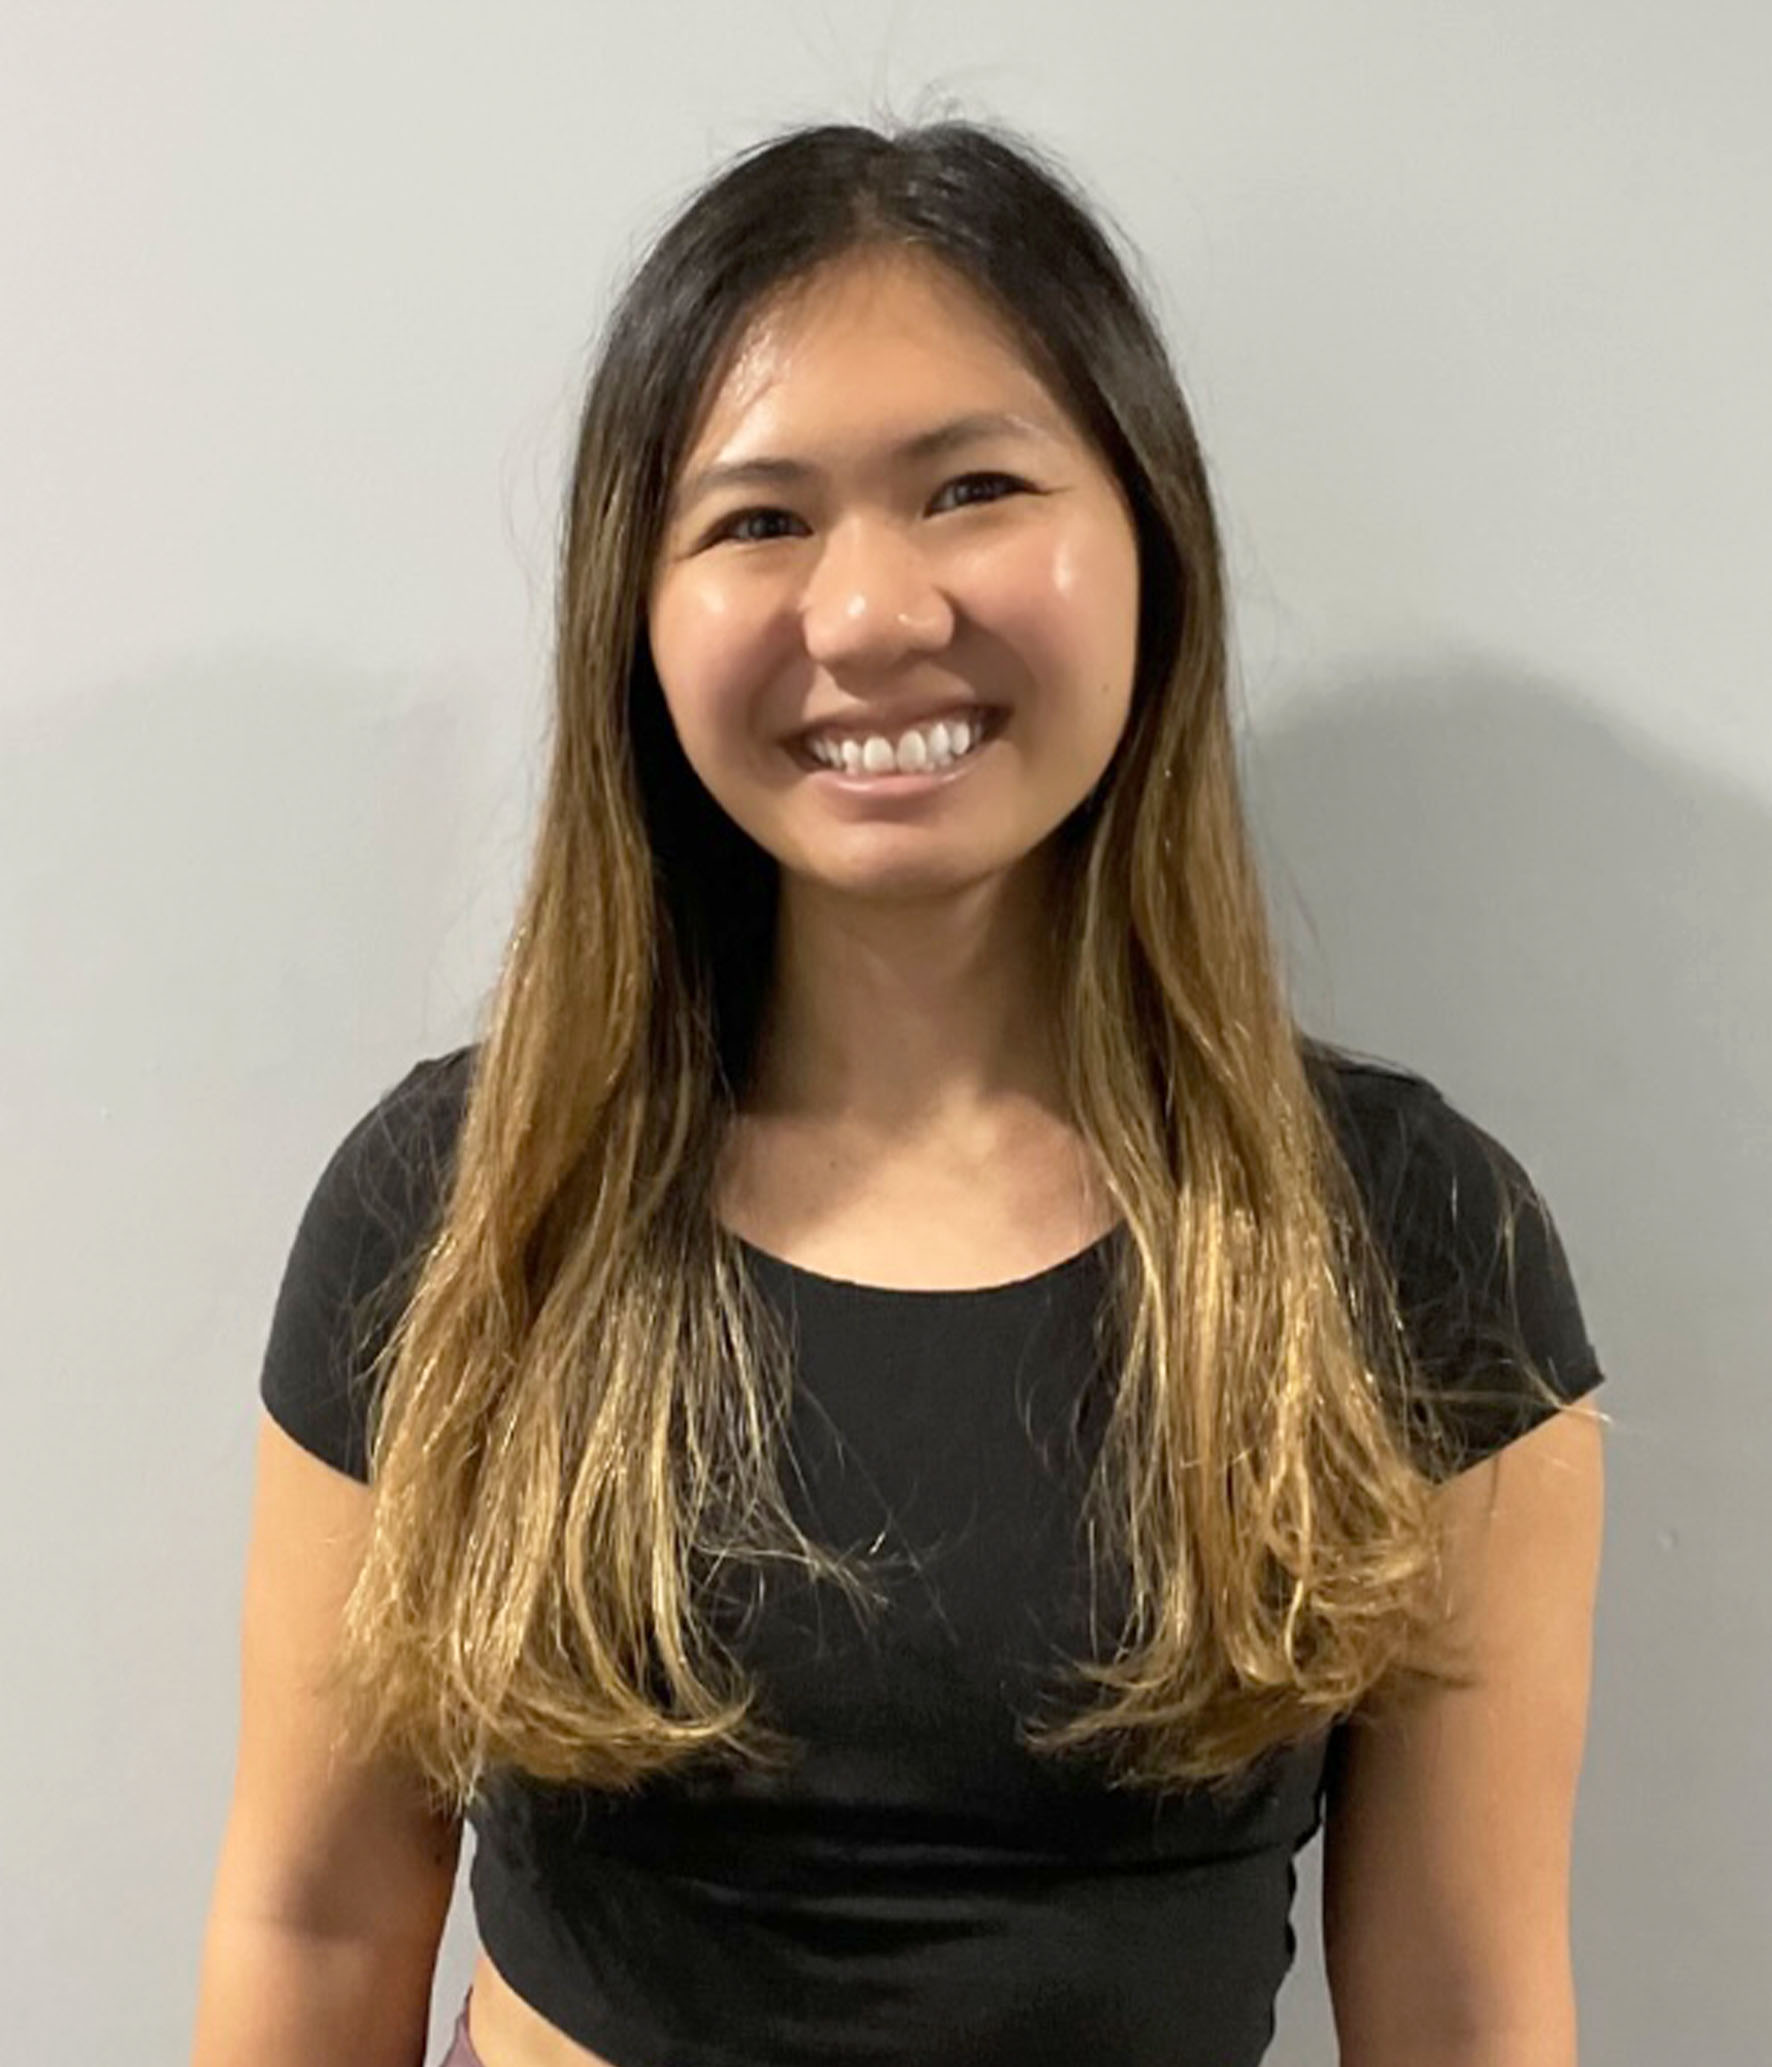 Stephanie Moy, a yoga instructor at Genesis Training LLC, based in New Jersey. Stephanie specializes in guiding individuals through yoga practices, promoting wellness, mindfulness, and a healthy lifestyle.